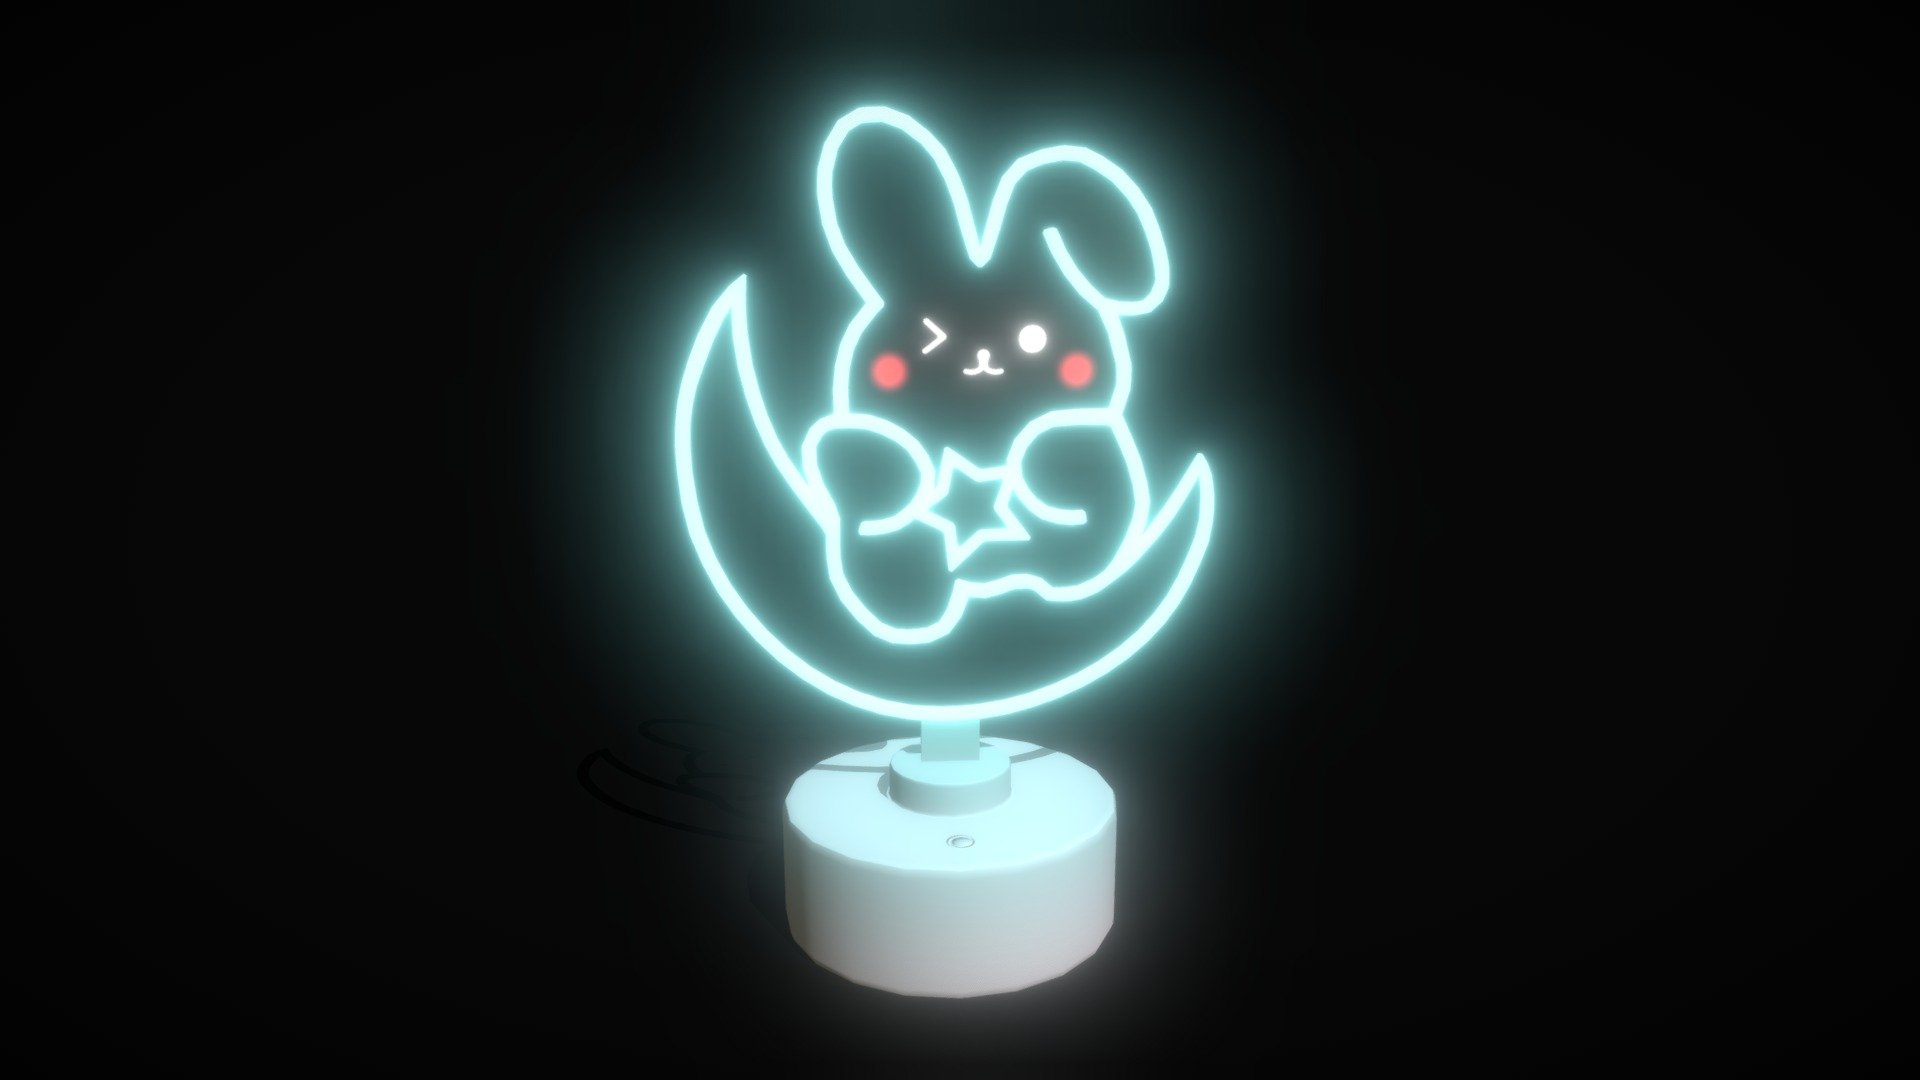 This is model of the night table lamp in shape of bunny. Model was made as a low poly.

This asset pack contains:

Model of the night table lamp.

Technical information:

Texture 2048x2048 ( one pack )

The textures include emission map, opacity map.

Bunny lamp - 3858 tris, 1987 faces, 1948 verts.

Contact details:

lukas.boban123@gmail.com

07591664224

https://www.facebook.com/lukas.boban/

Thank you for taking look please consider leave like.

Model will be free until 26/05/2021 3d model